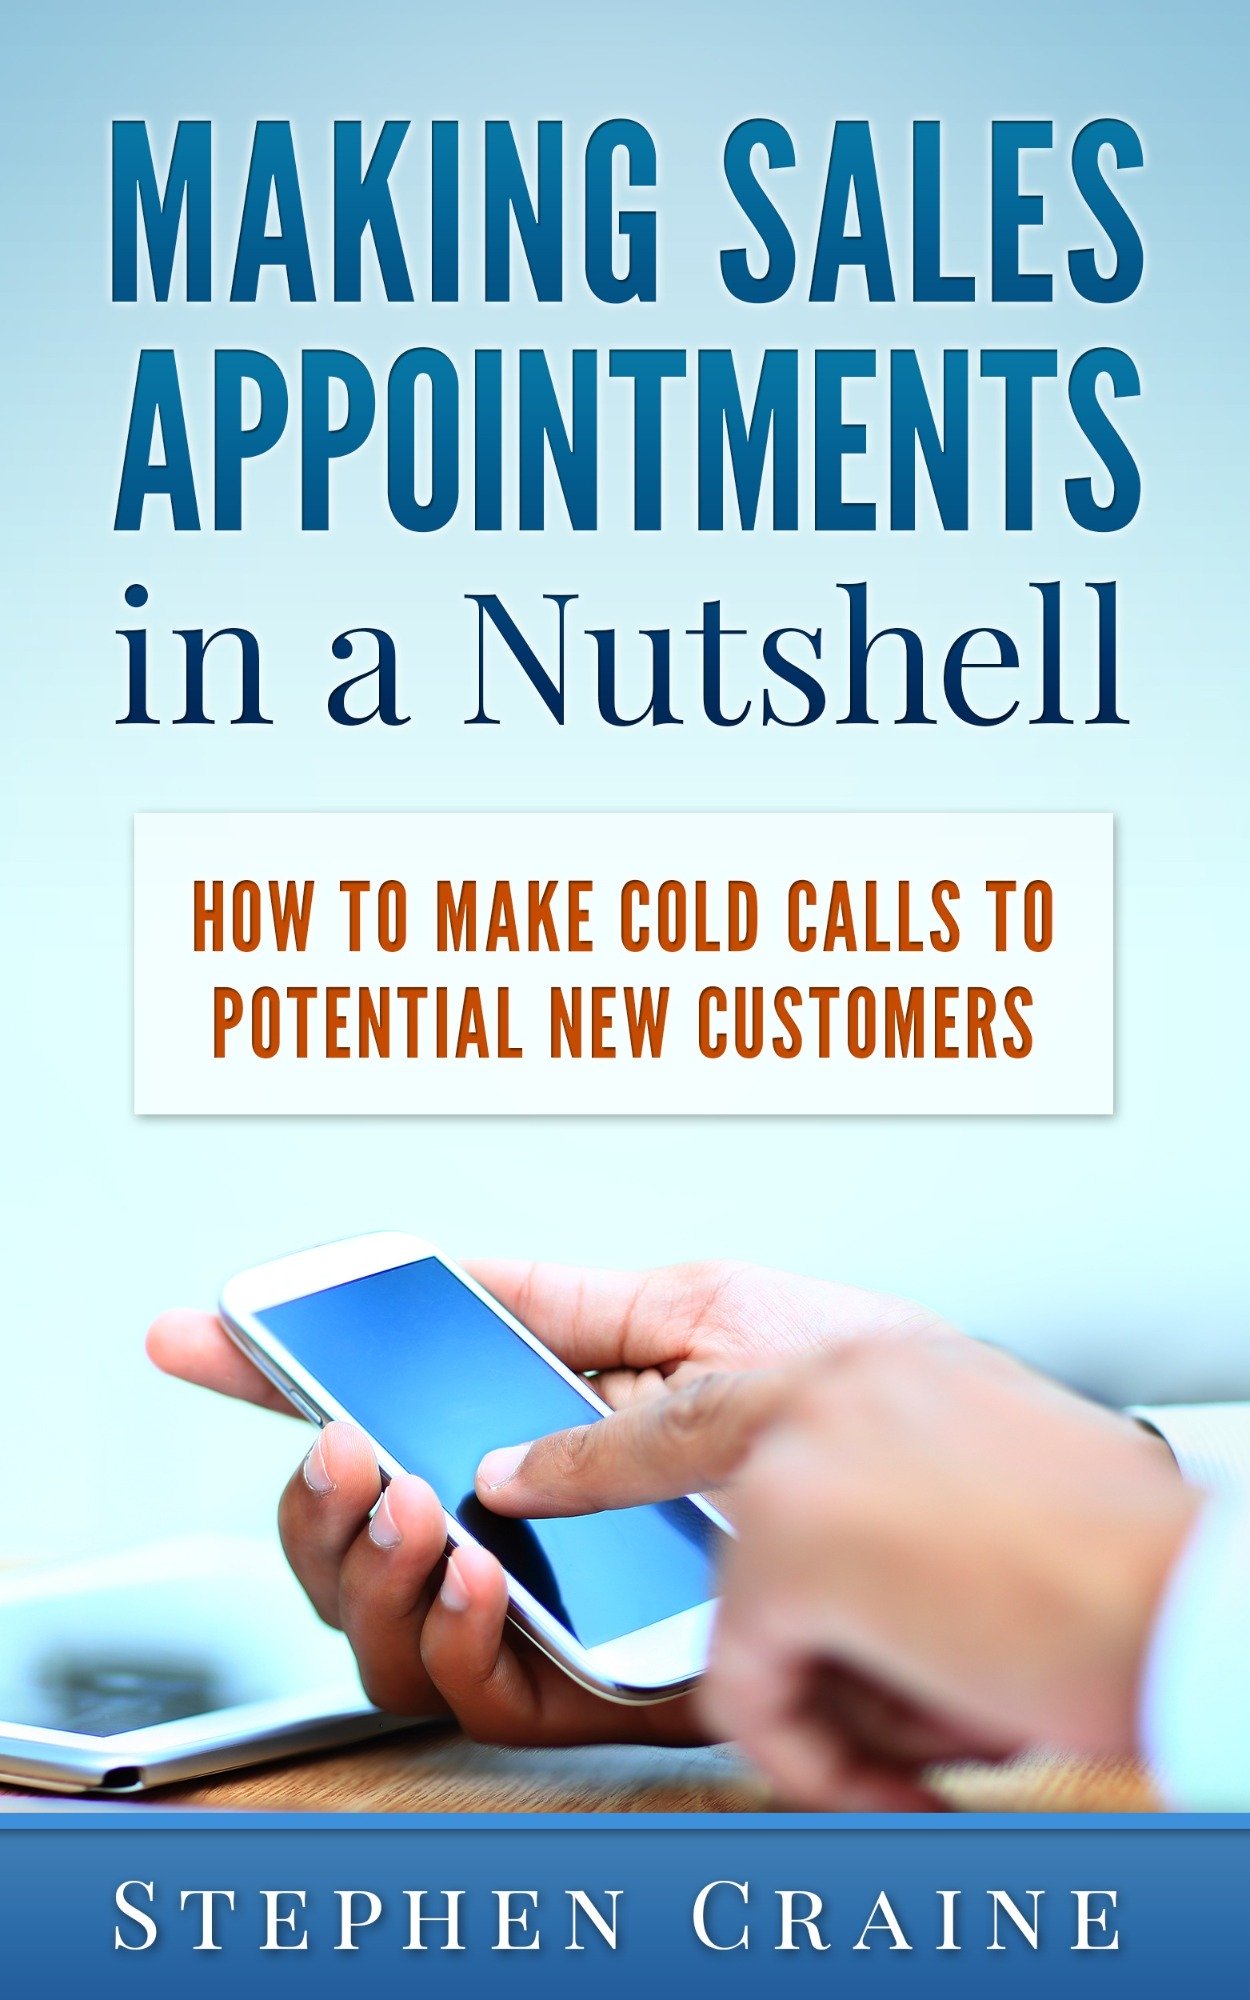 EBook Making Sales Appointments in a Nutshell